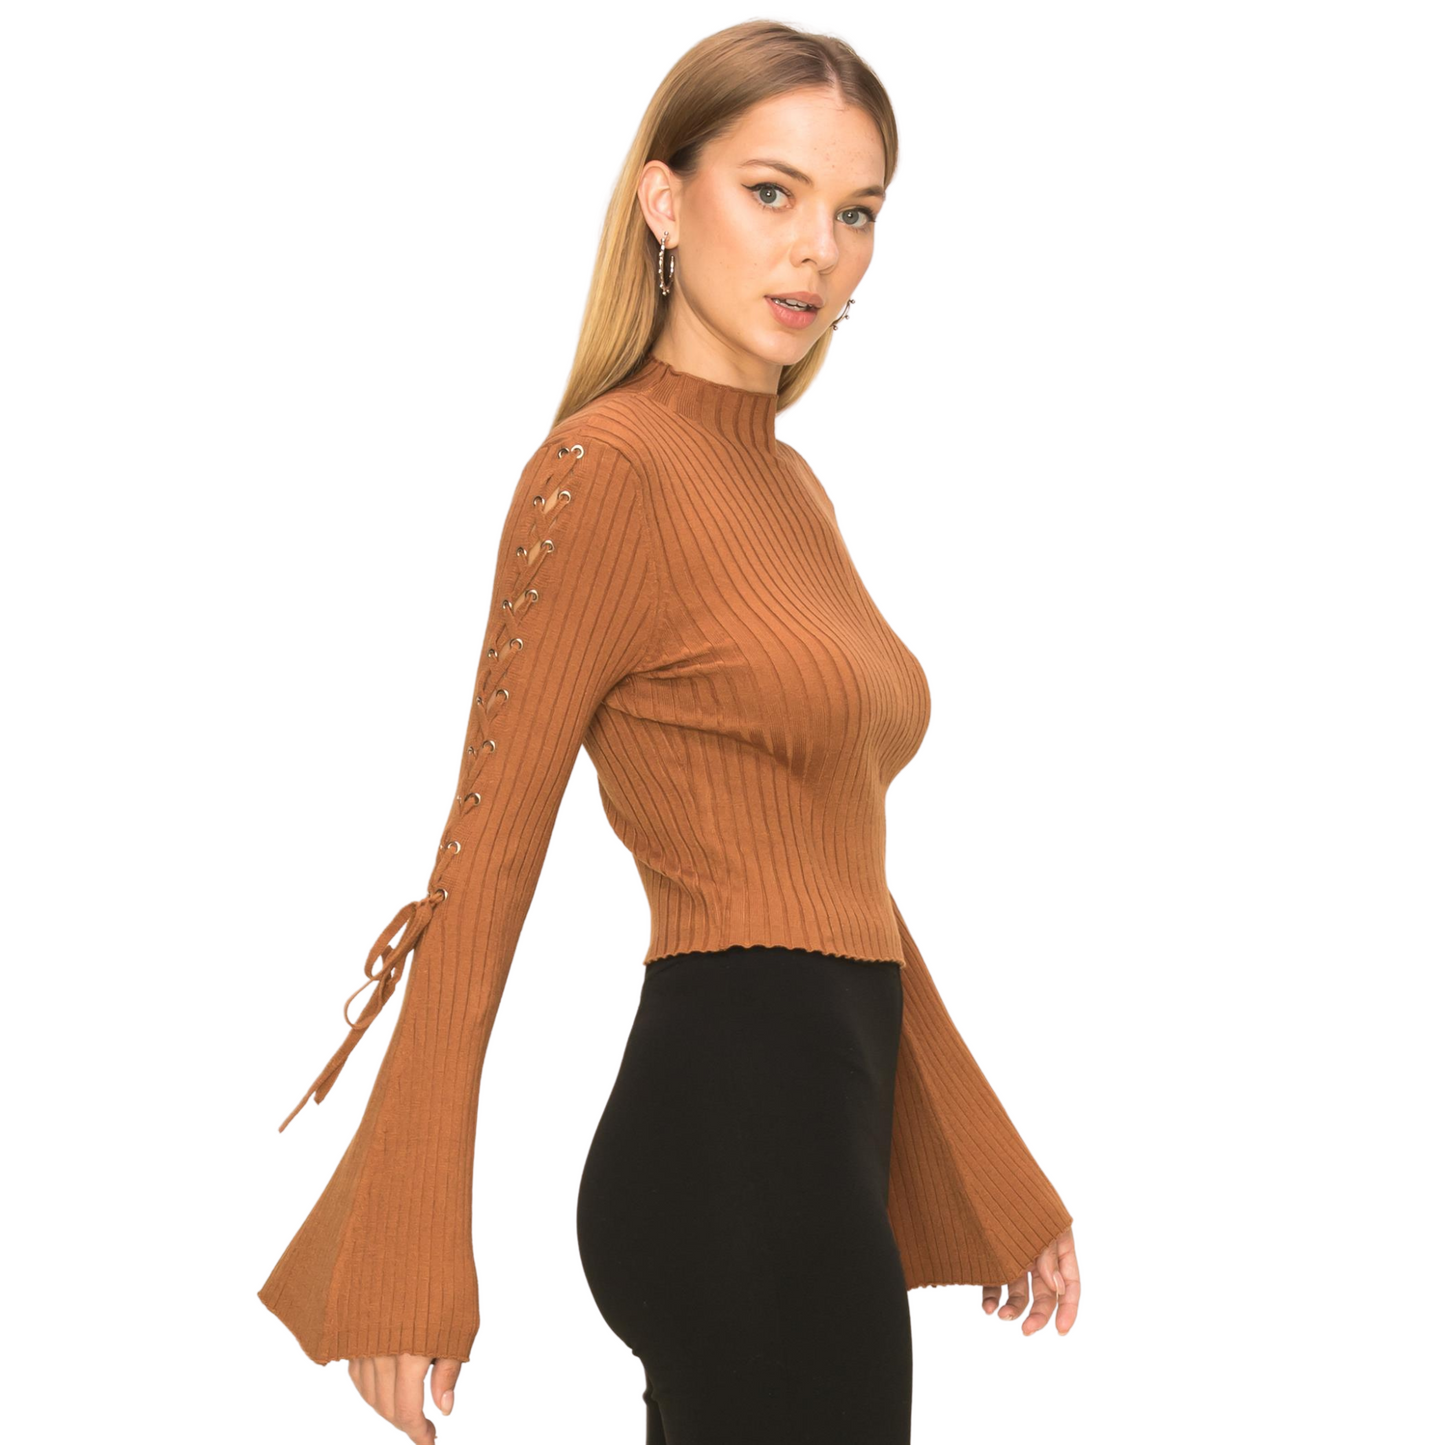 Hyfve Solid Knit Top W/ Lace & Bell Sleeves (3 Colors! S-L)